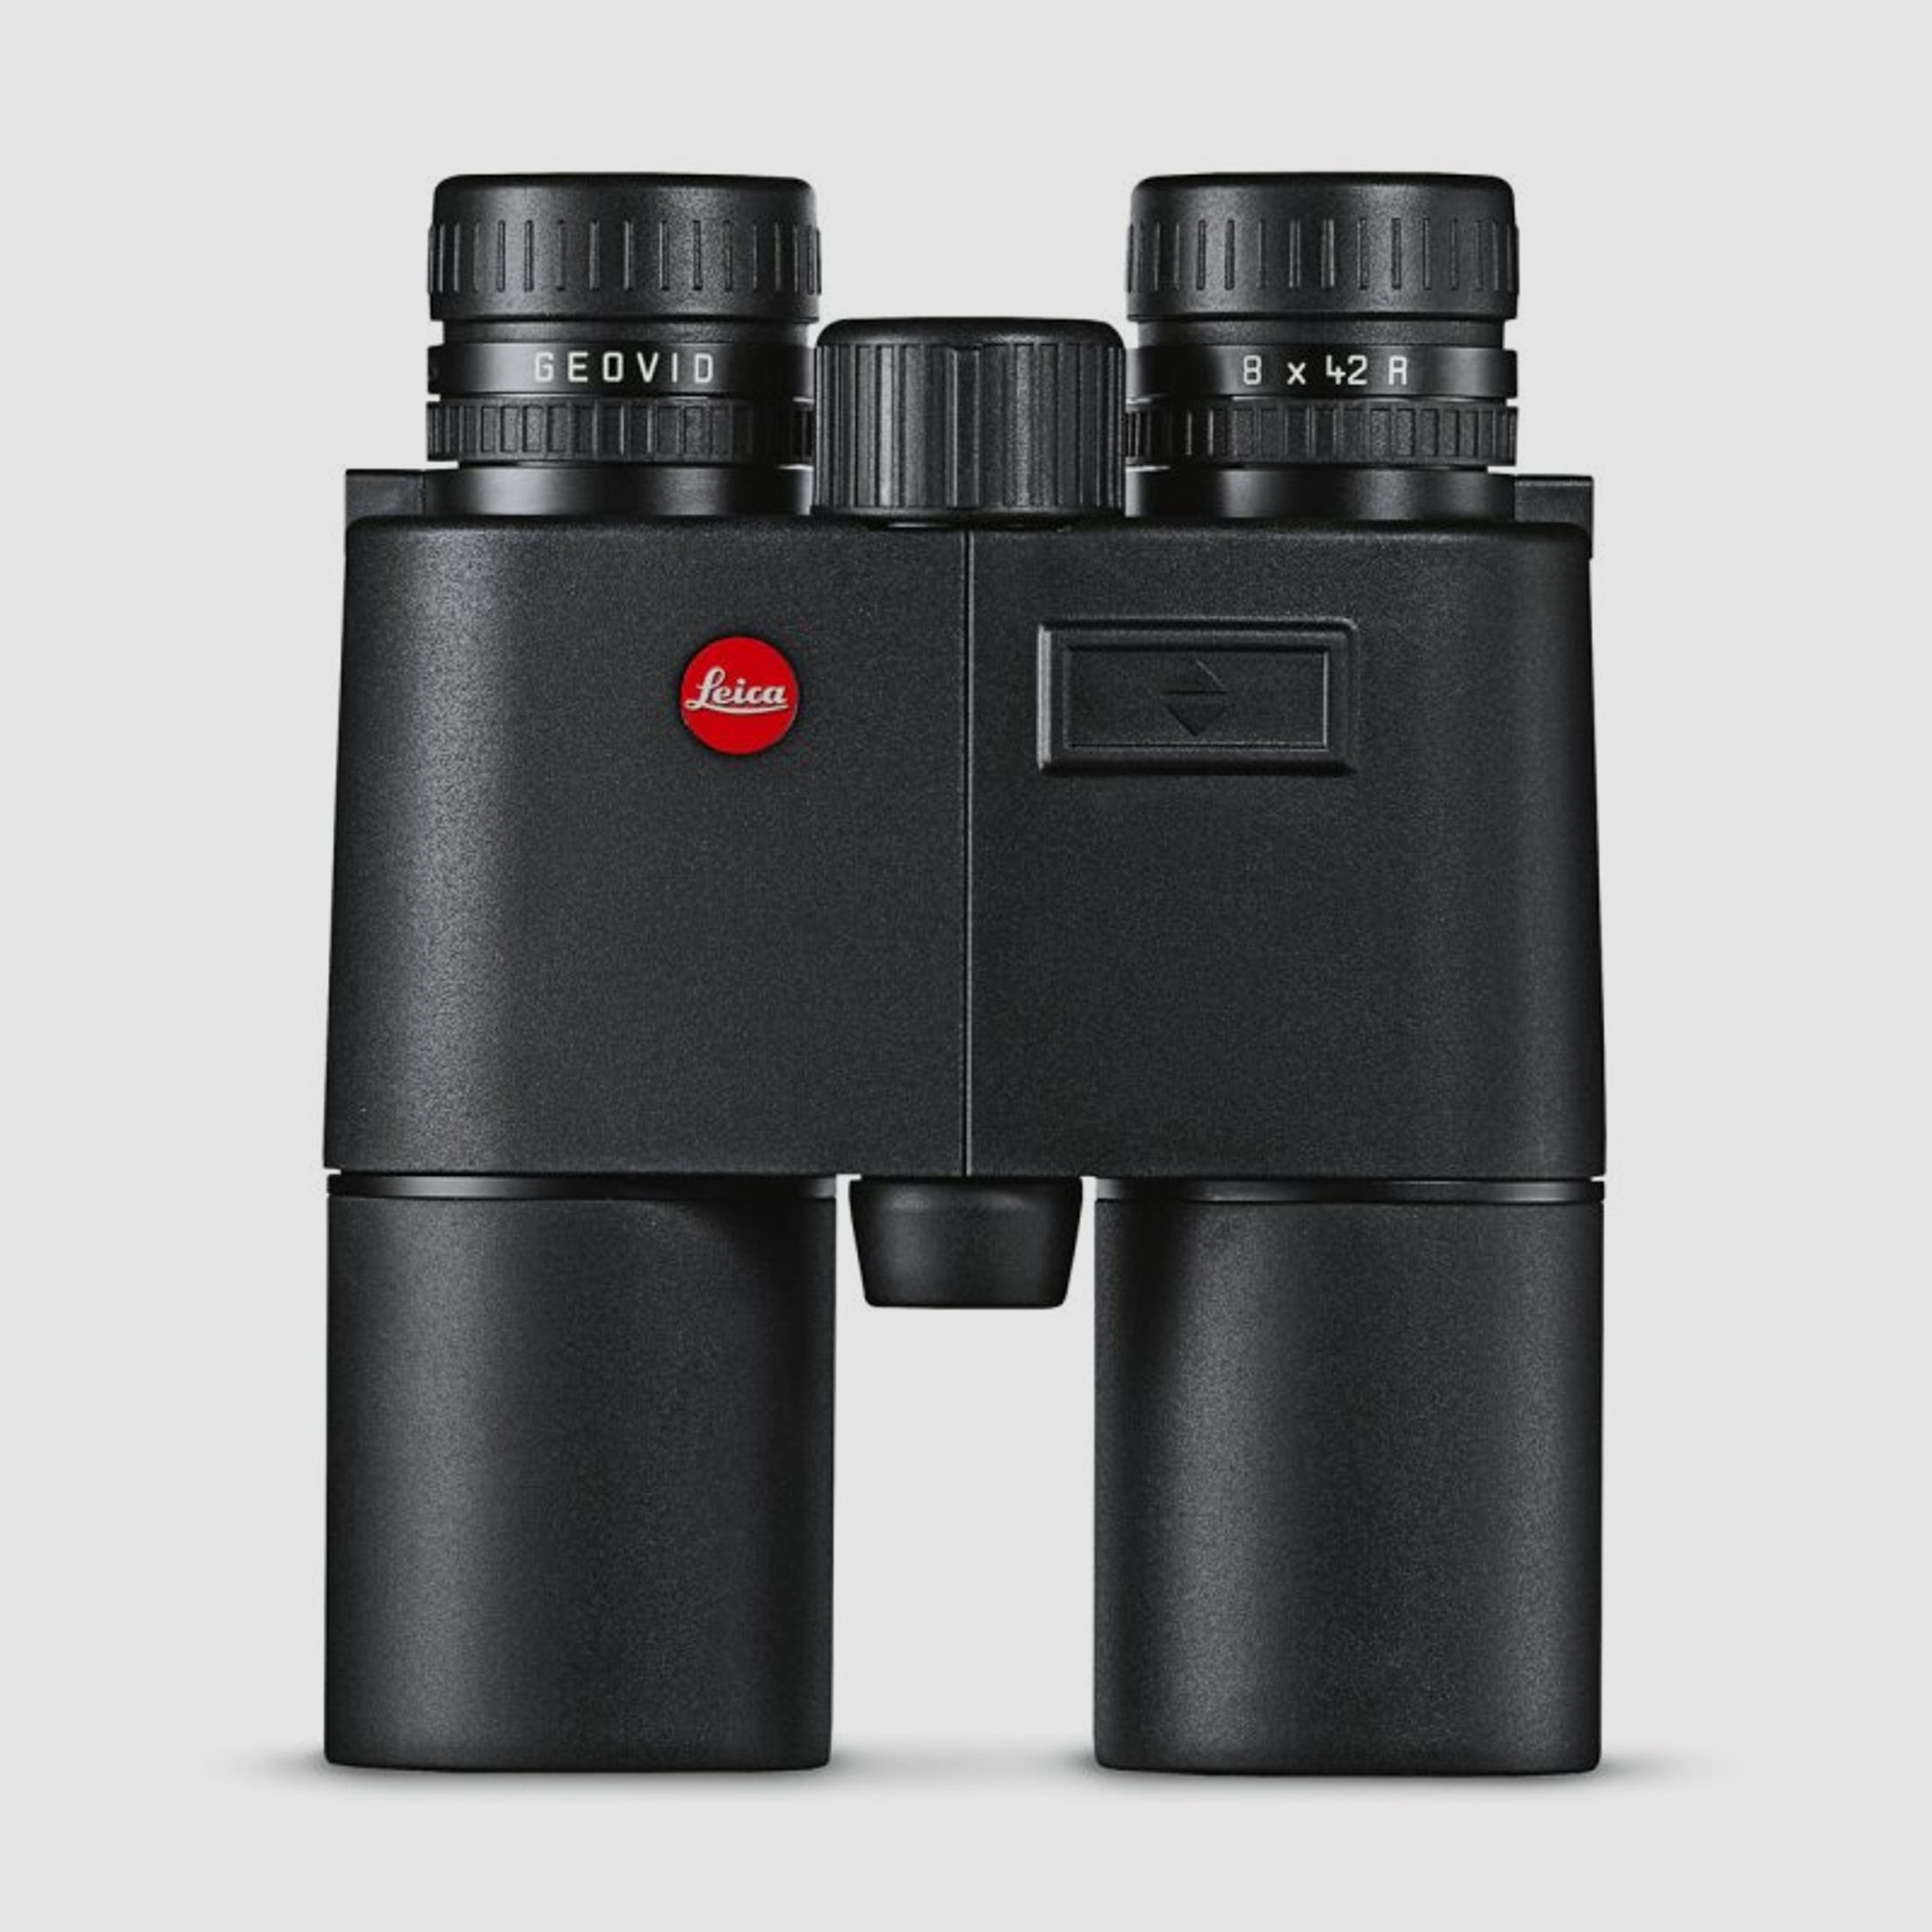 Leica Fortis 6 1-6x24i L-4a